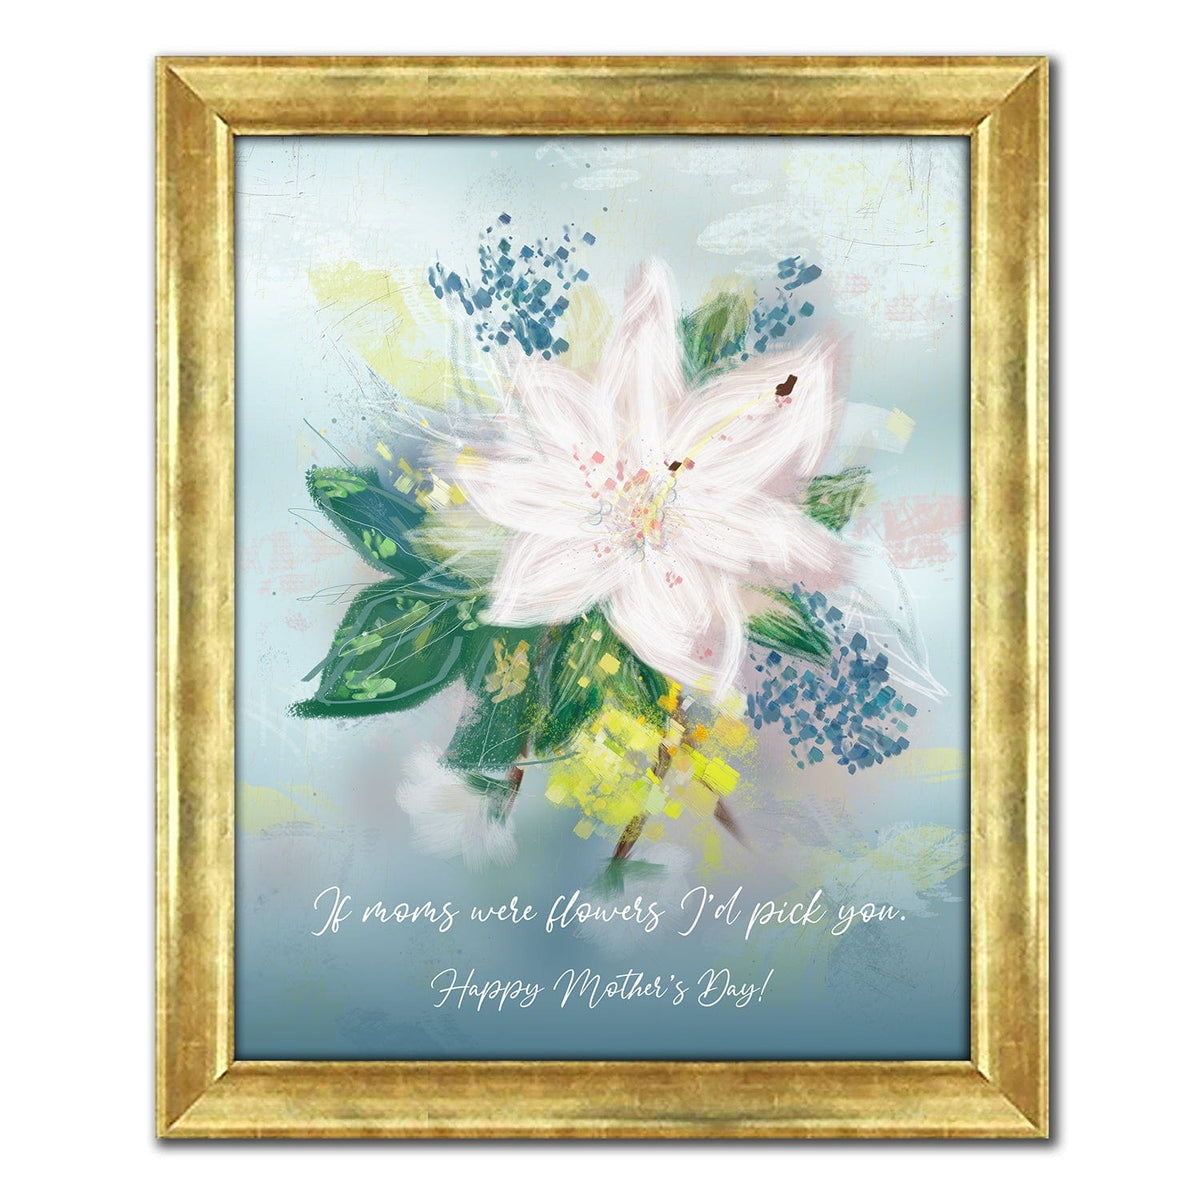 Framed canvas art for mom - personalized mother&#39;s day gift idea